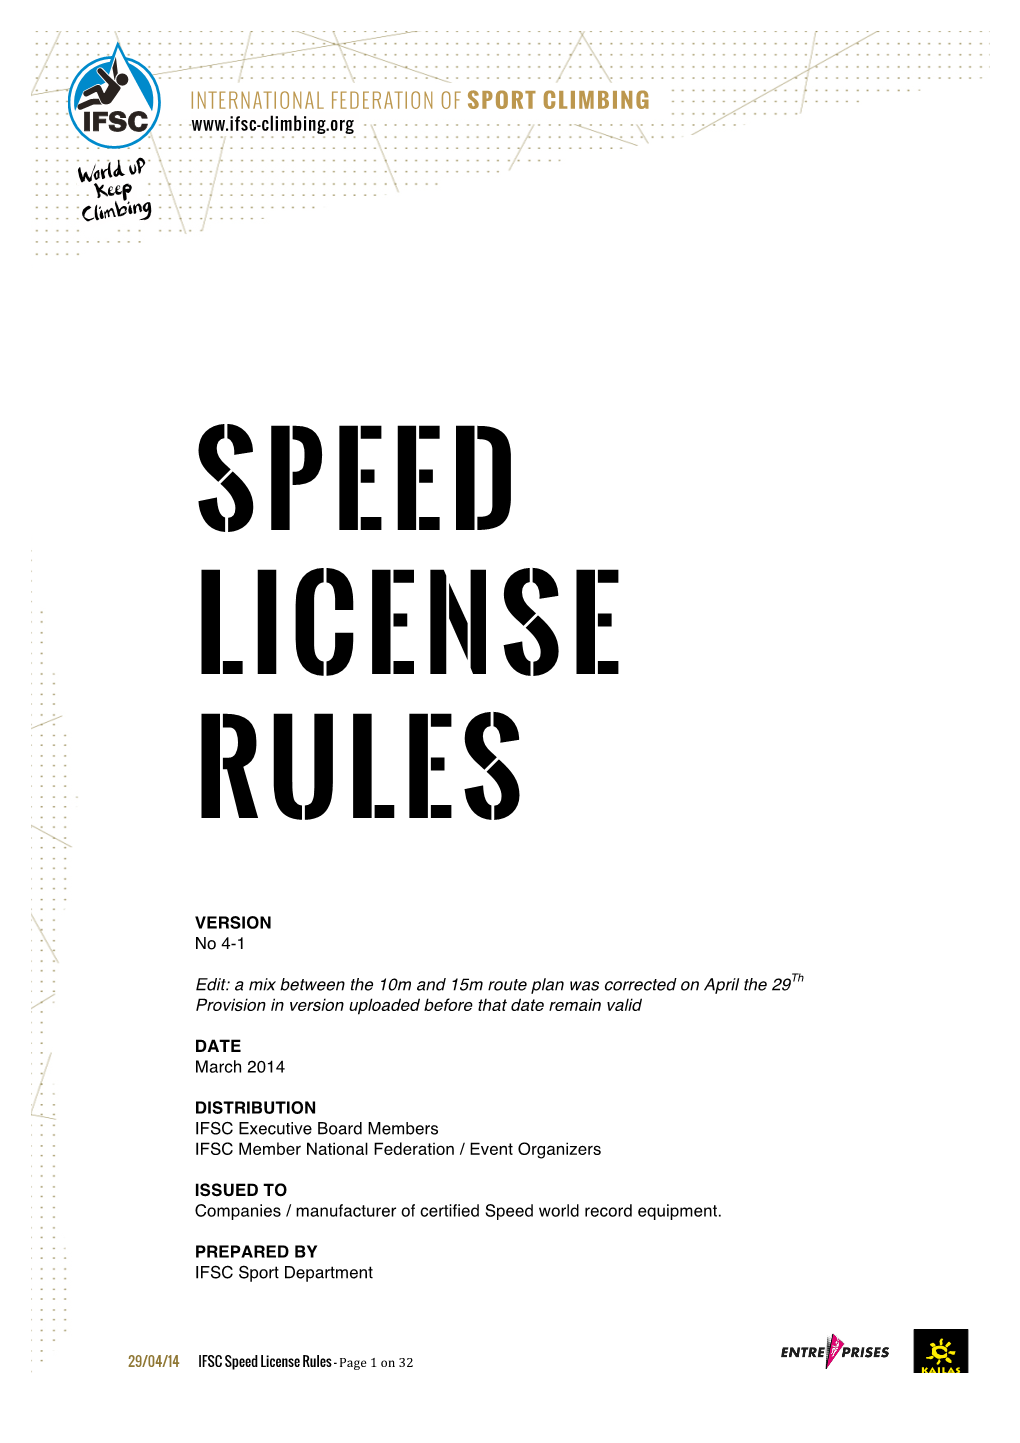 IFSC Speed License Rules - Page 1 on 32